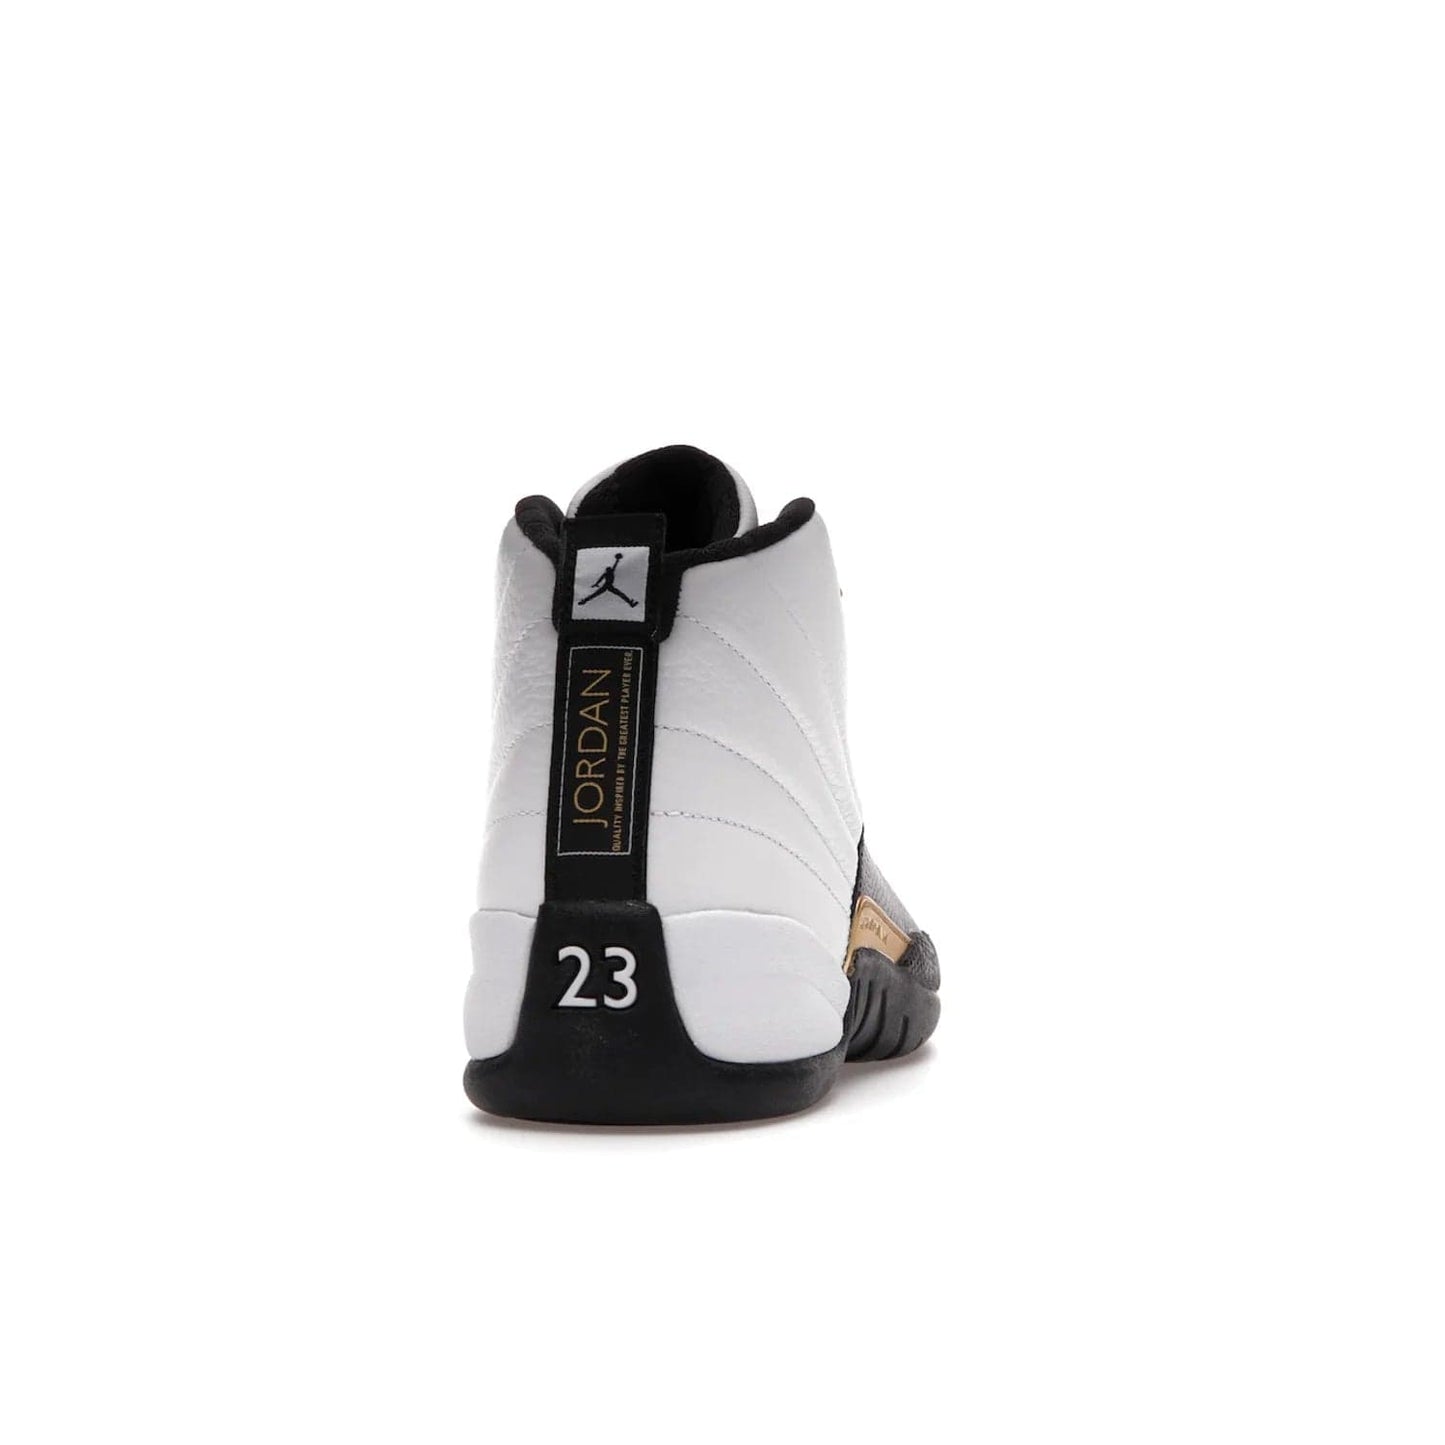 Jordan 12 Retro Royalty Taxi - Image 29 - Only at www.BallersClubKickz.com - Make a statement with the Air Jordan 12 Retro Royalty Taxi. Woven heel tag, gold plaquet, white tumbled leather upper plus a black toe wrap, make this modern take on the classic a must-have. Available in November 2021.